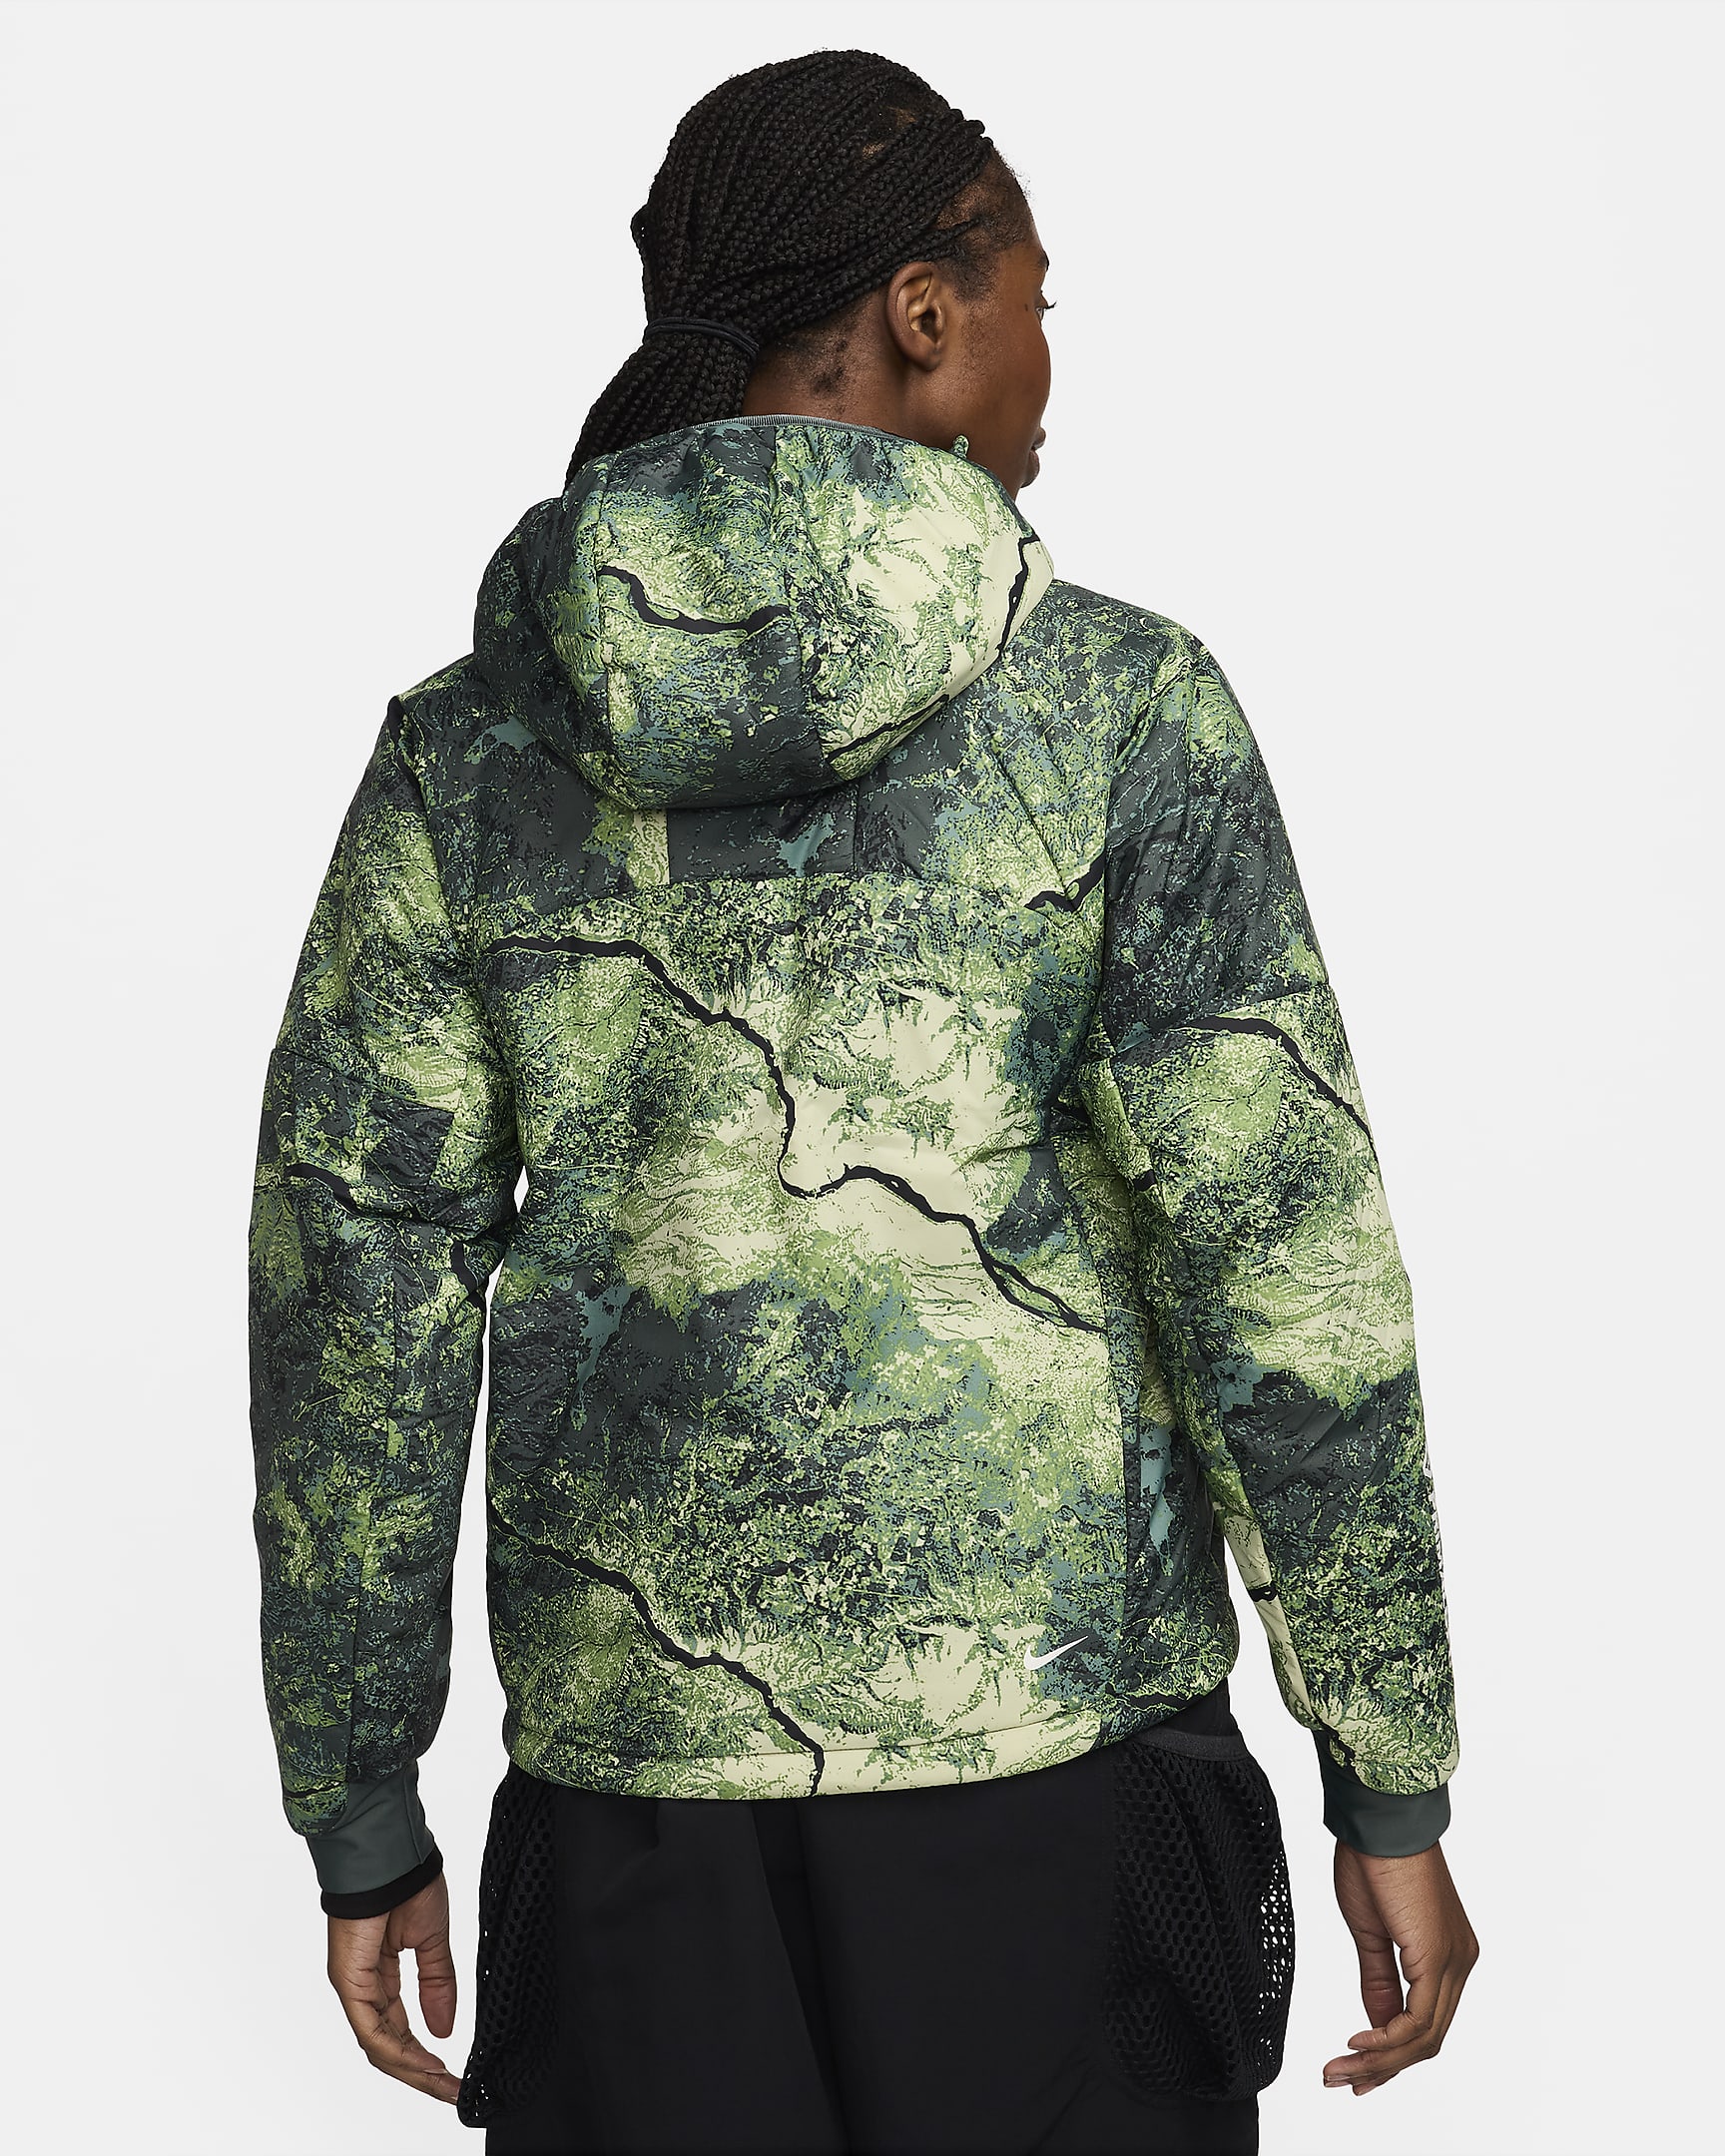 Nike ACG 'Rope de Dope' Women's Therma-FIT ADV Jacket - Vintage Green/Summit White